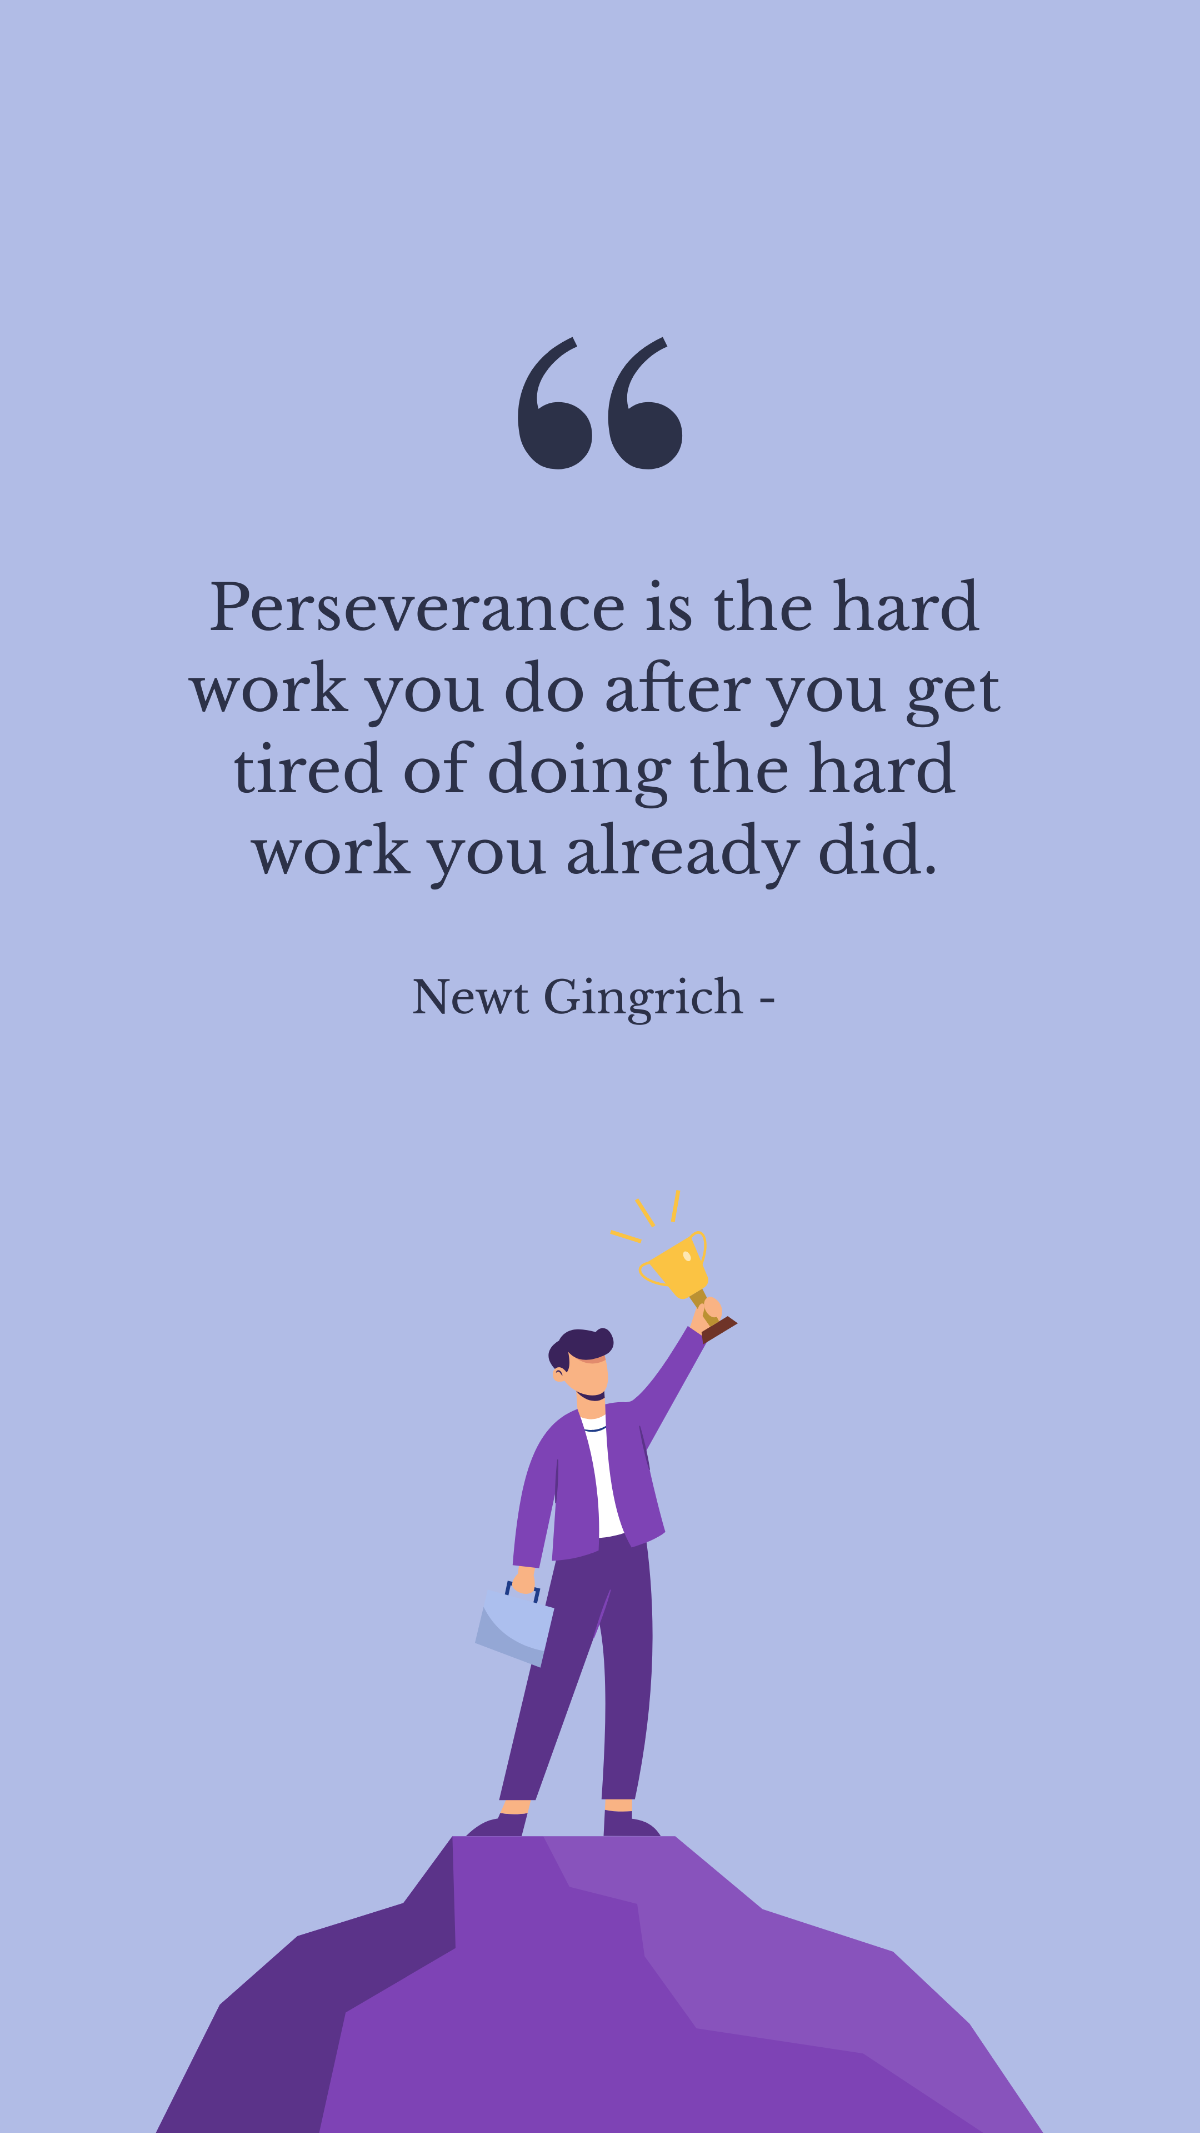 Free Newt Gingrich - Perseverance is the hard work you do after you get tired of doing the hard work you already did. Template